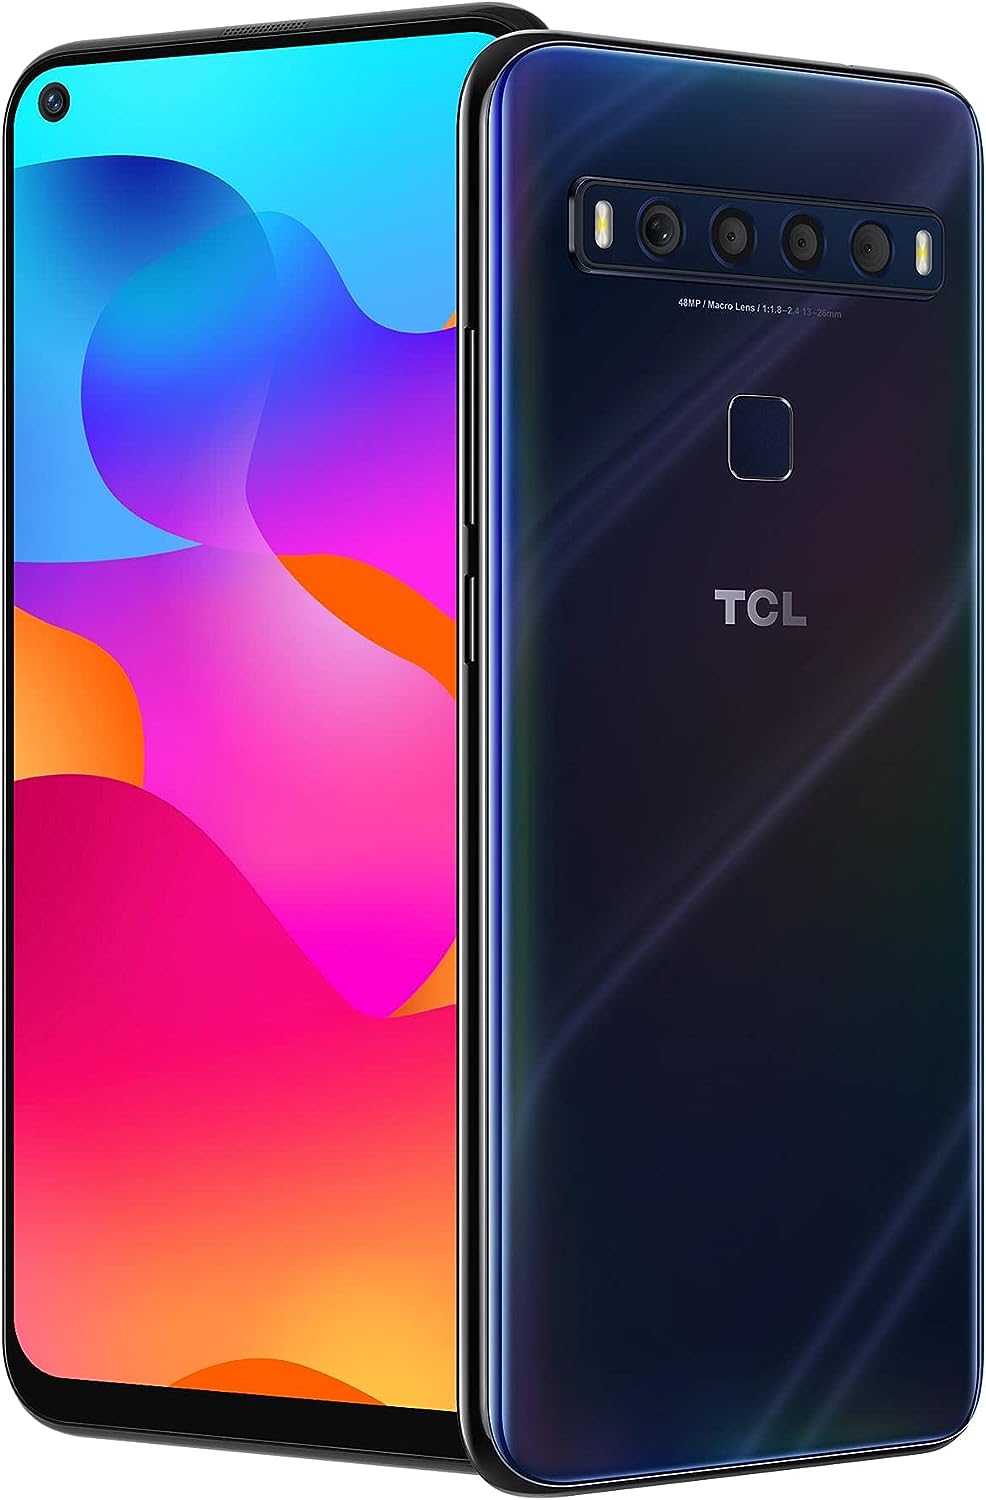 TCL 10L, Unlocked Android Smartphone with 6.53" FHD + LCD Display, 48MP Quad Rear Camera System, 64GB+6GB RAM, 4000mAh Battery